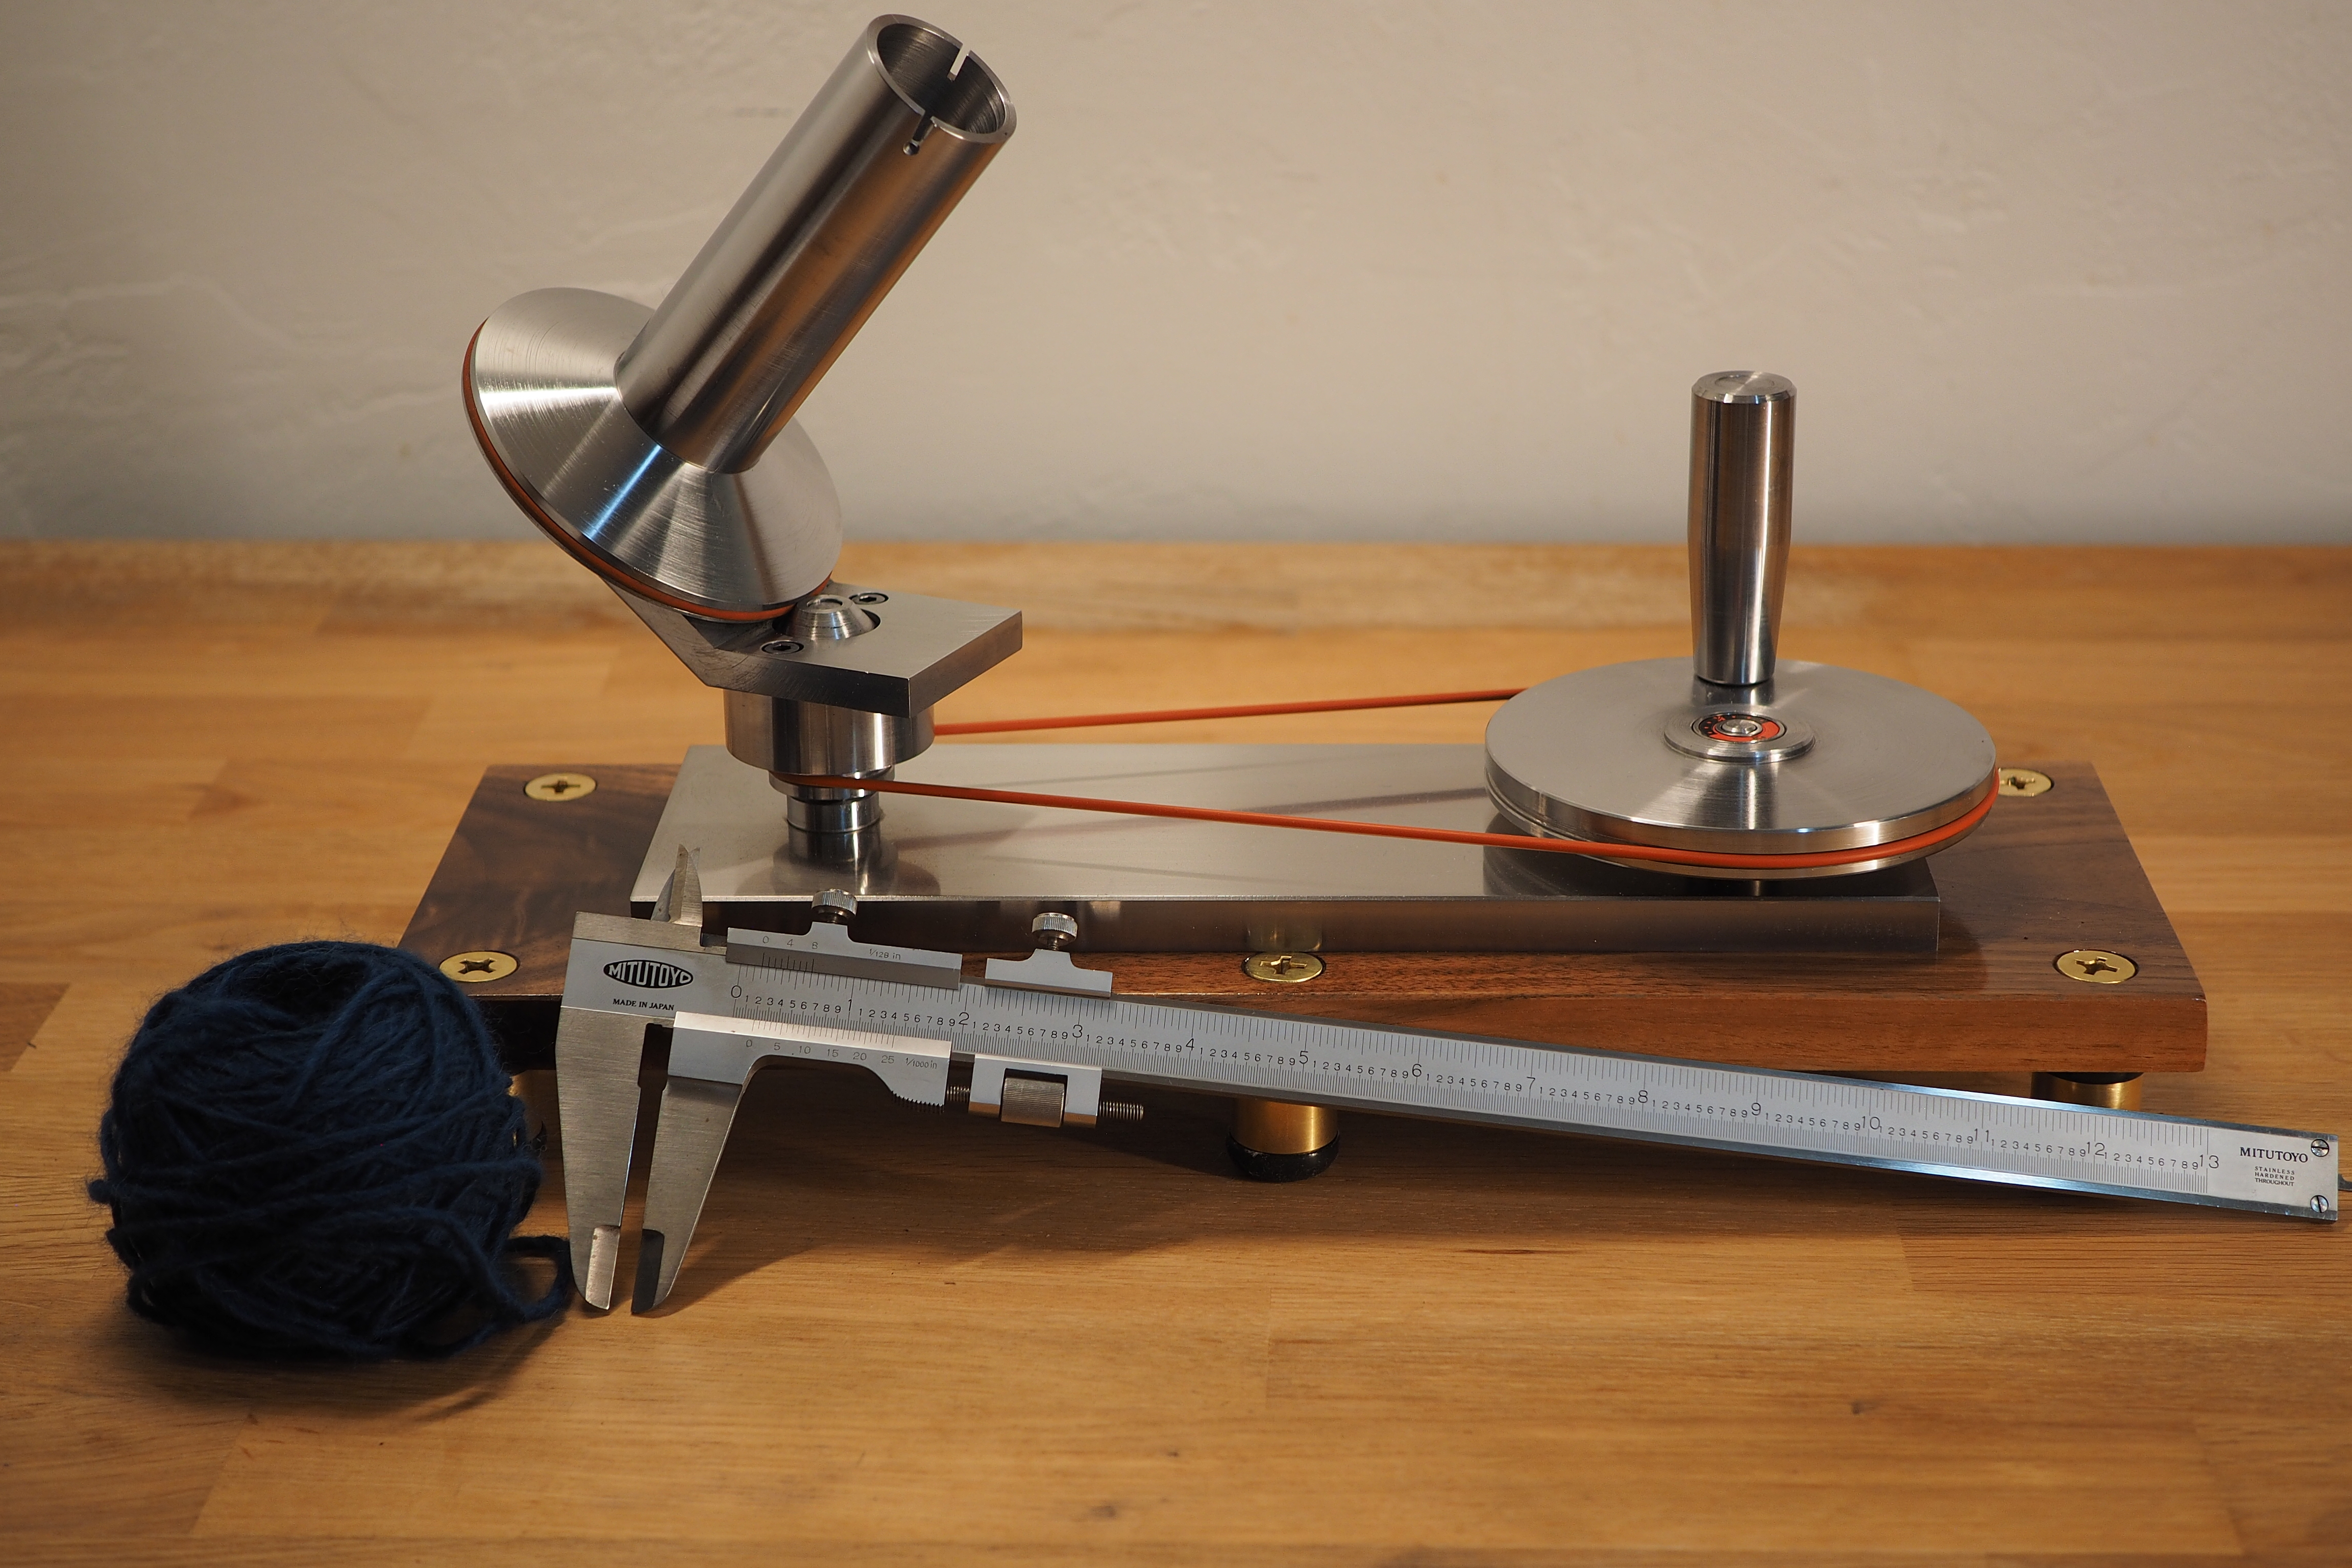 A picture of a very shiny solid steel yarn winder on a wooden surface. A ball of yarn and some vernier calipers are in the foreground.